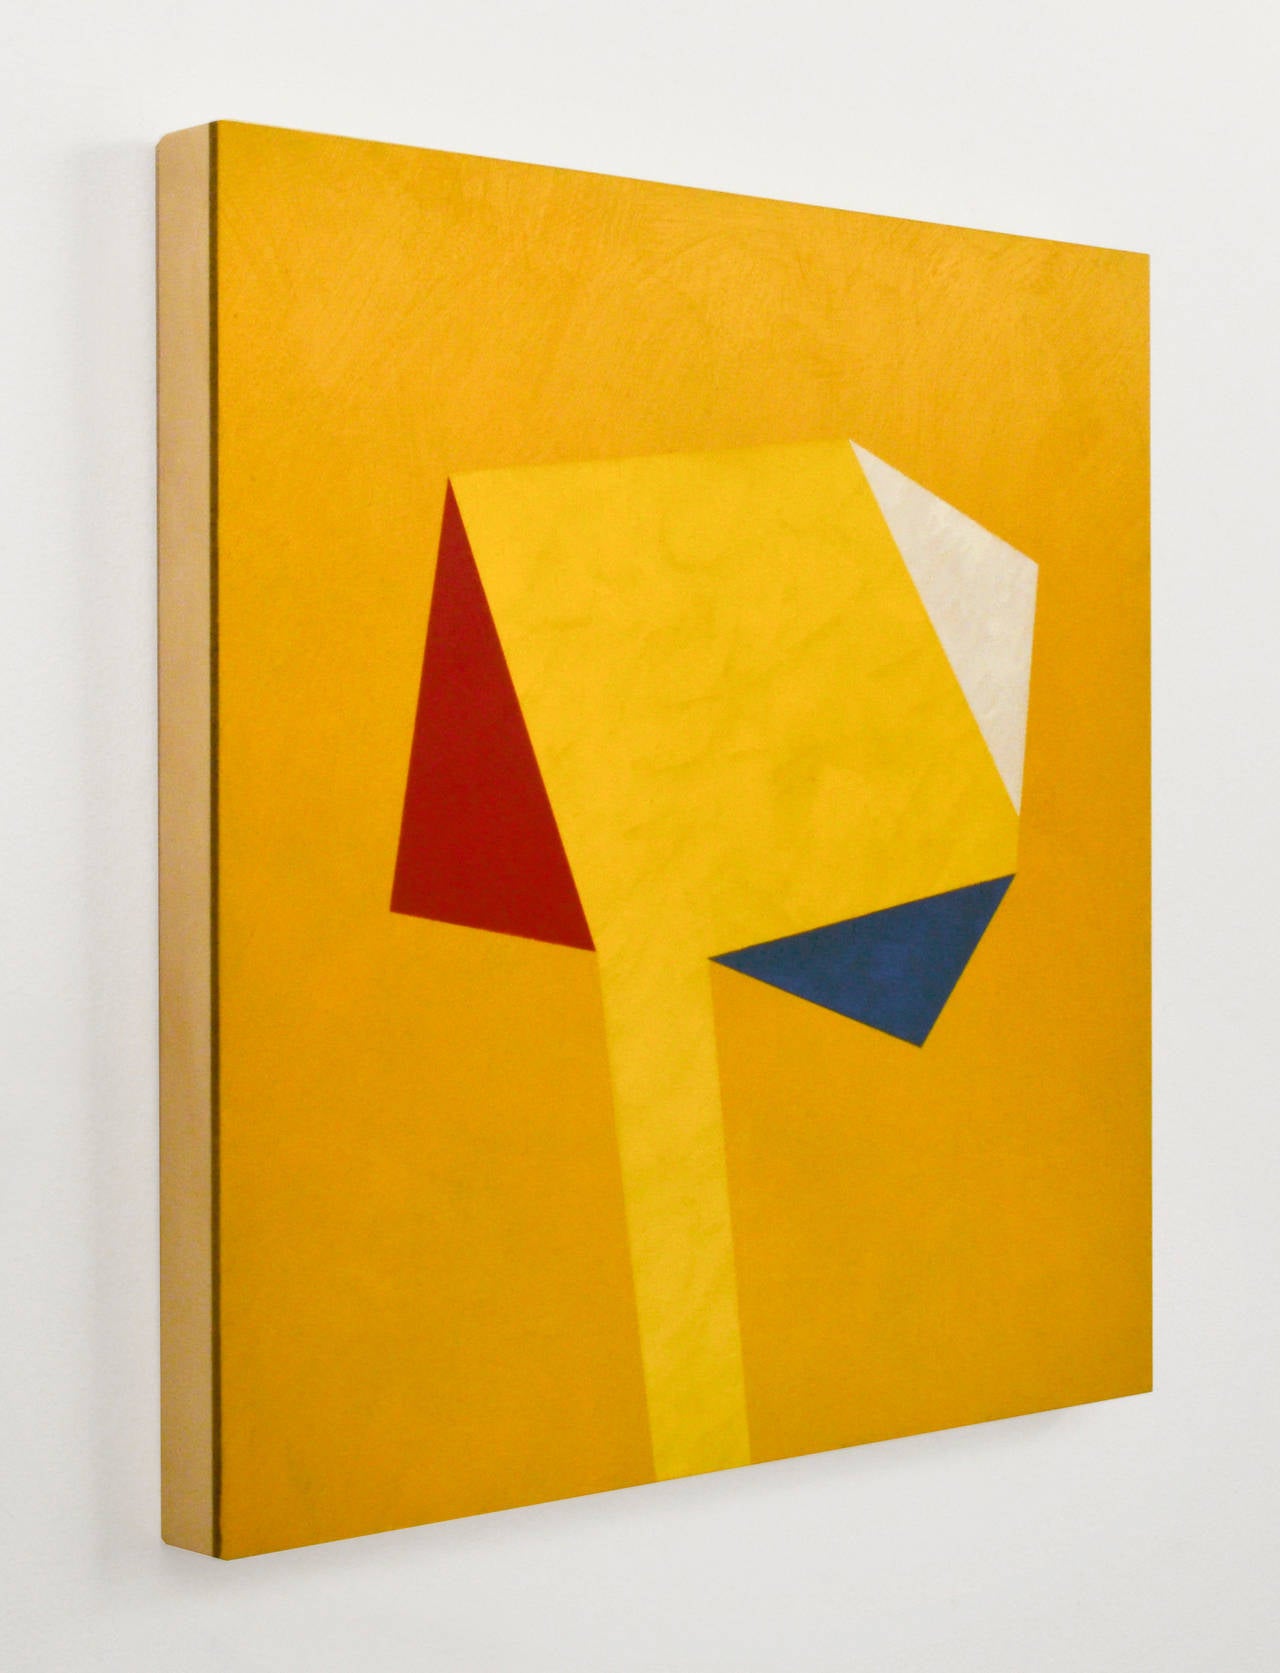 Untited : Abstraction - Painting by Willard Lustenader